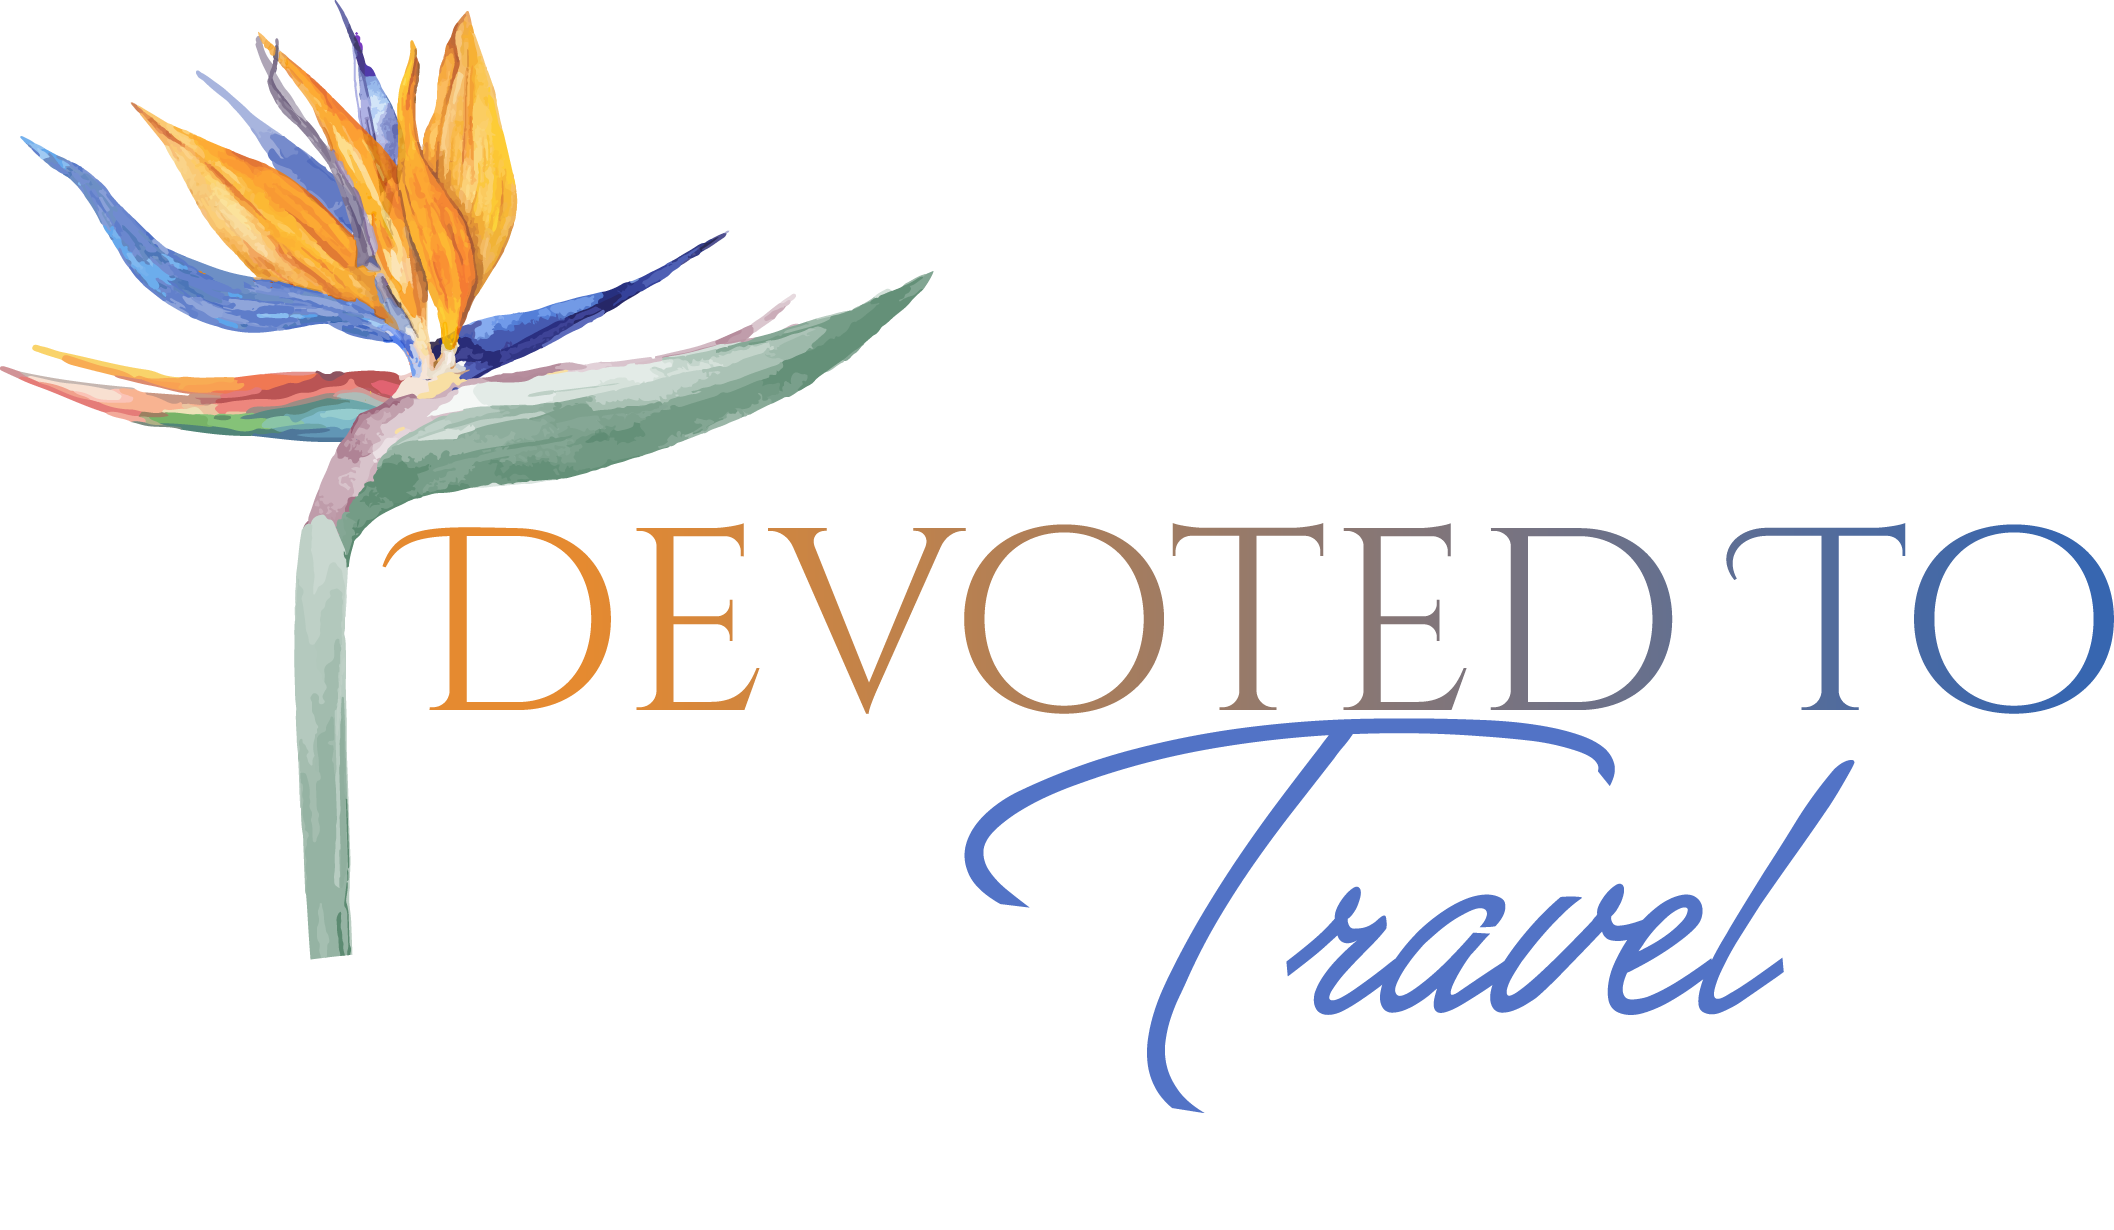 Devoted to Travel